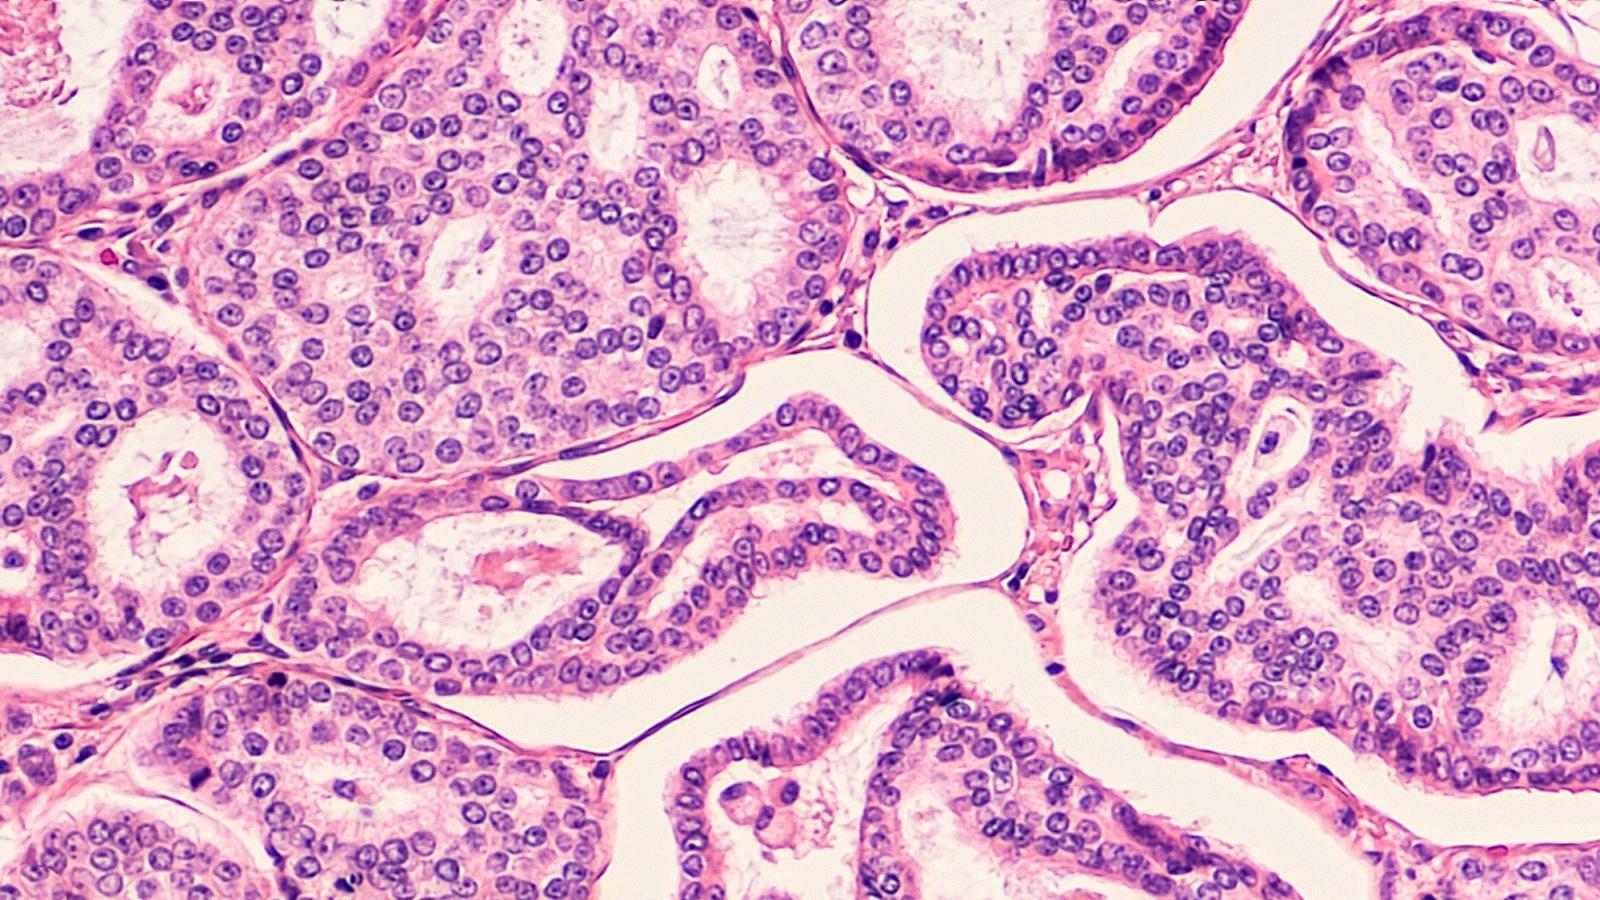 breast cancer histology